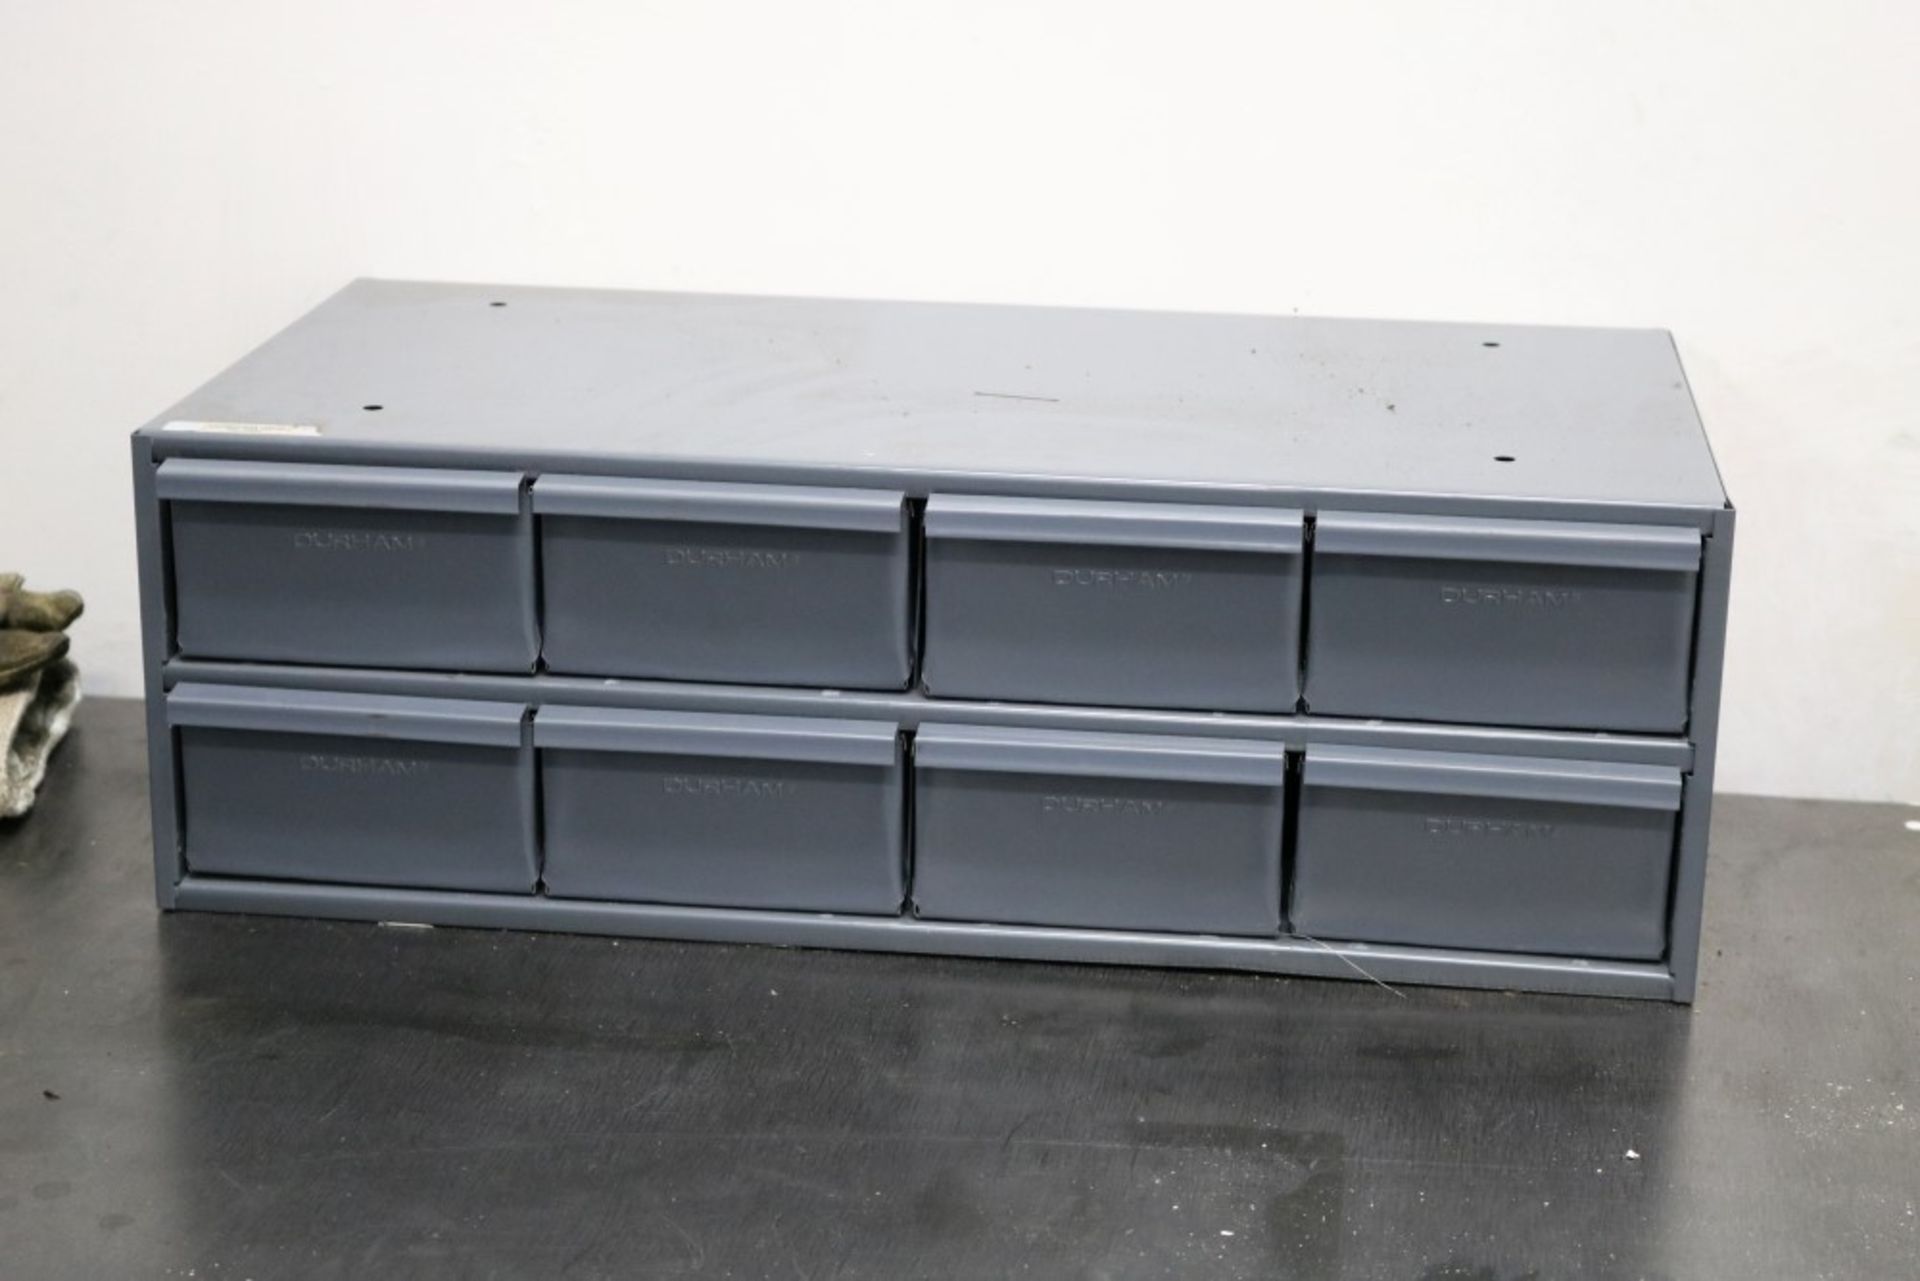 Welding Station - 36" x 60" x 34" Heavy Duty Steel Table, 8 Drawer Durham Metal Bin and (2) 6' x - Image 3 of 8